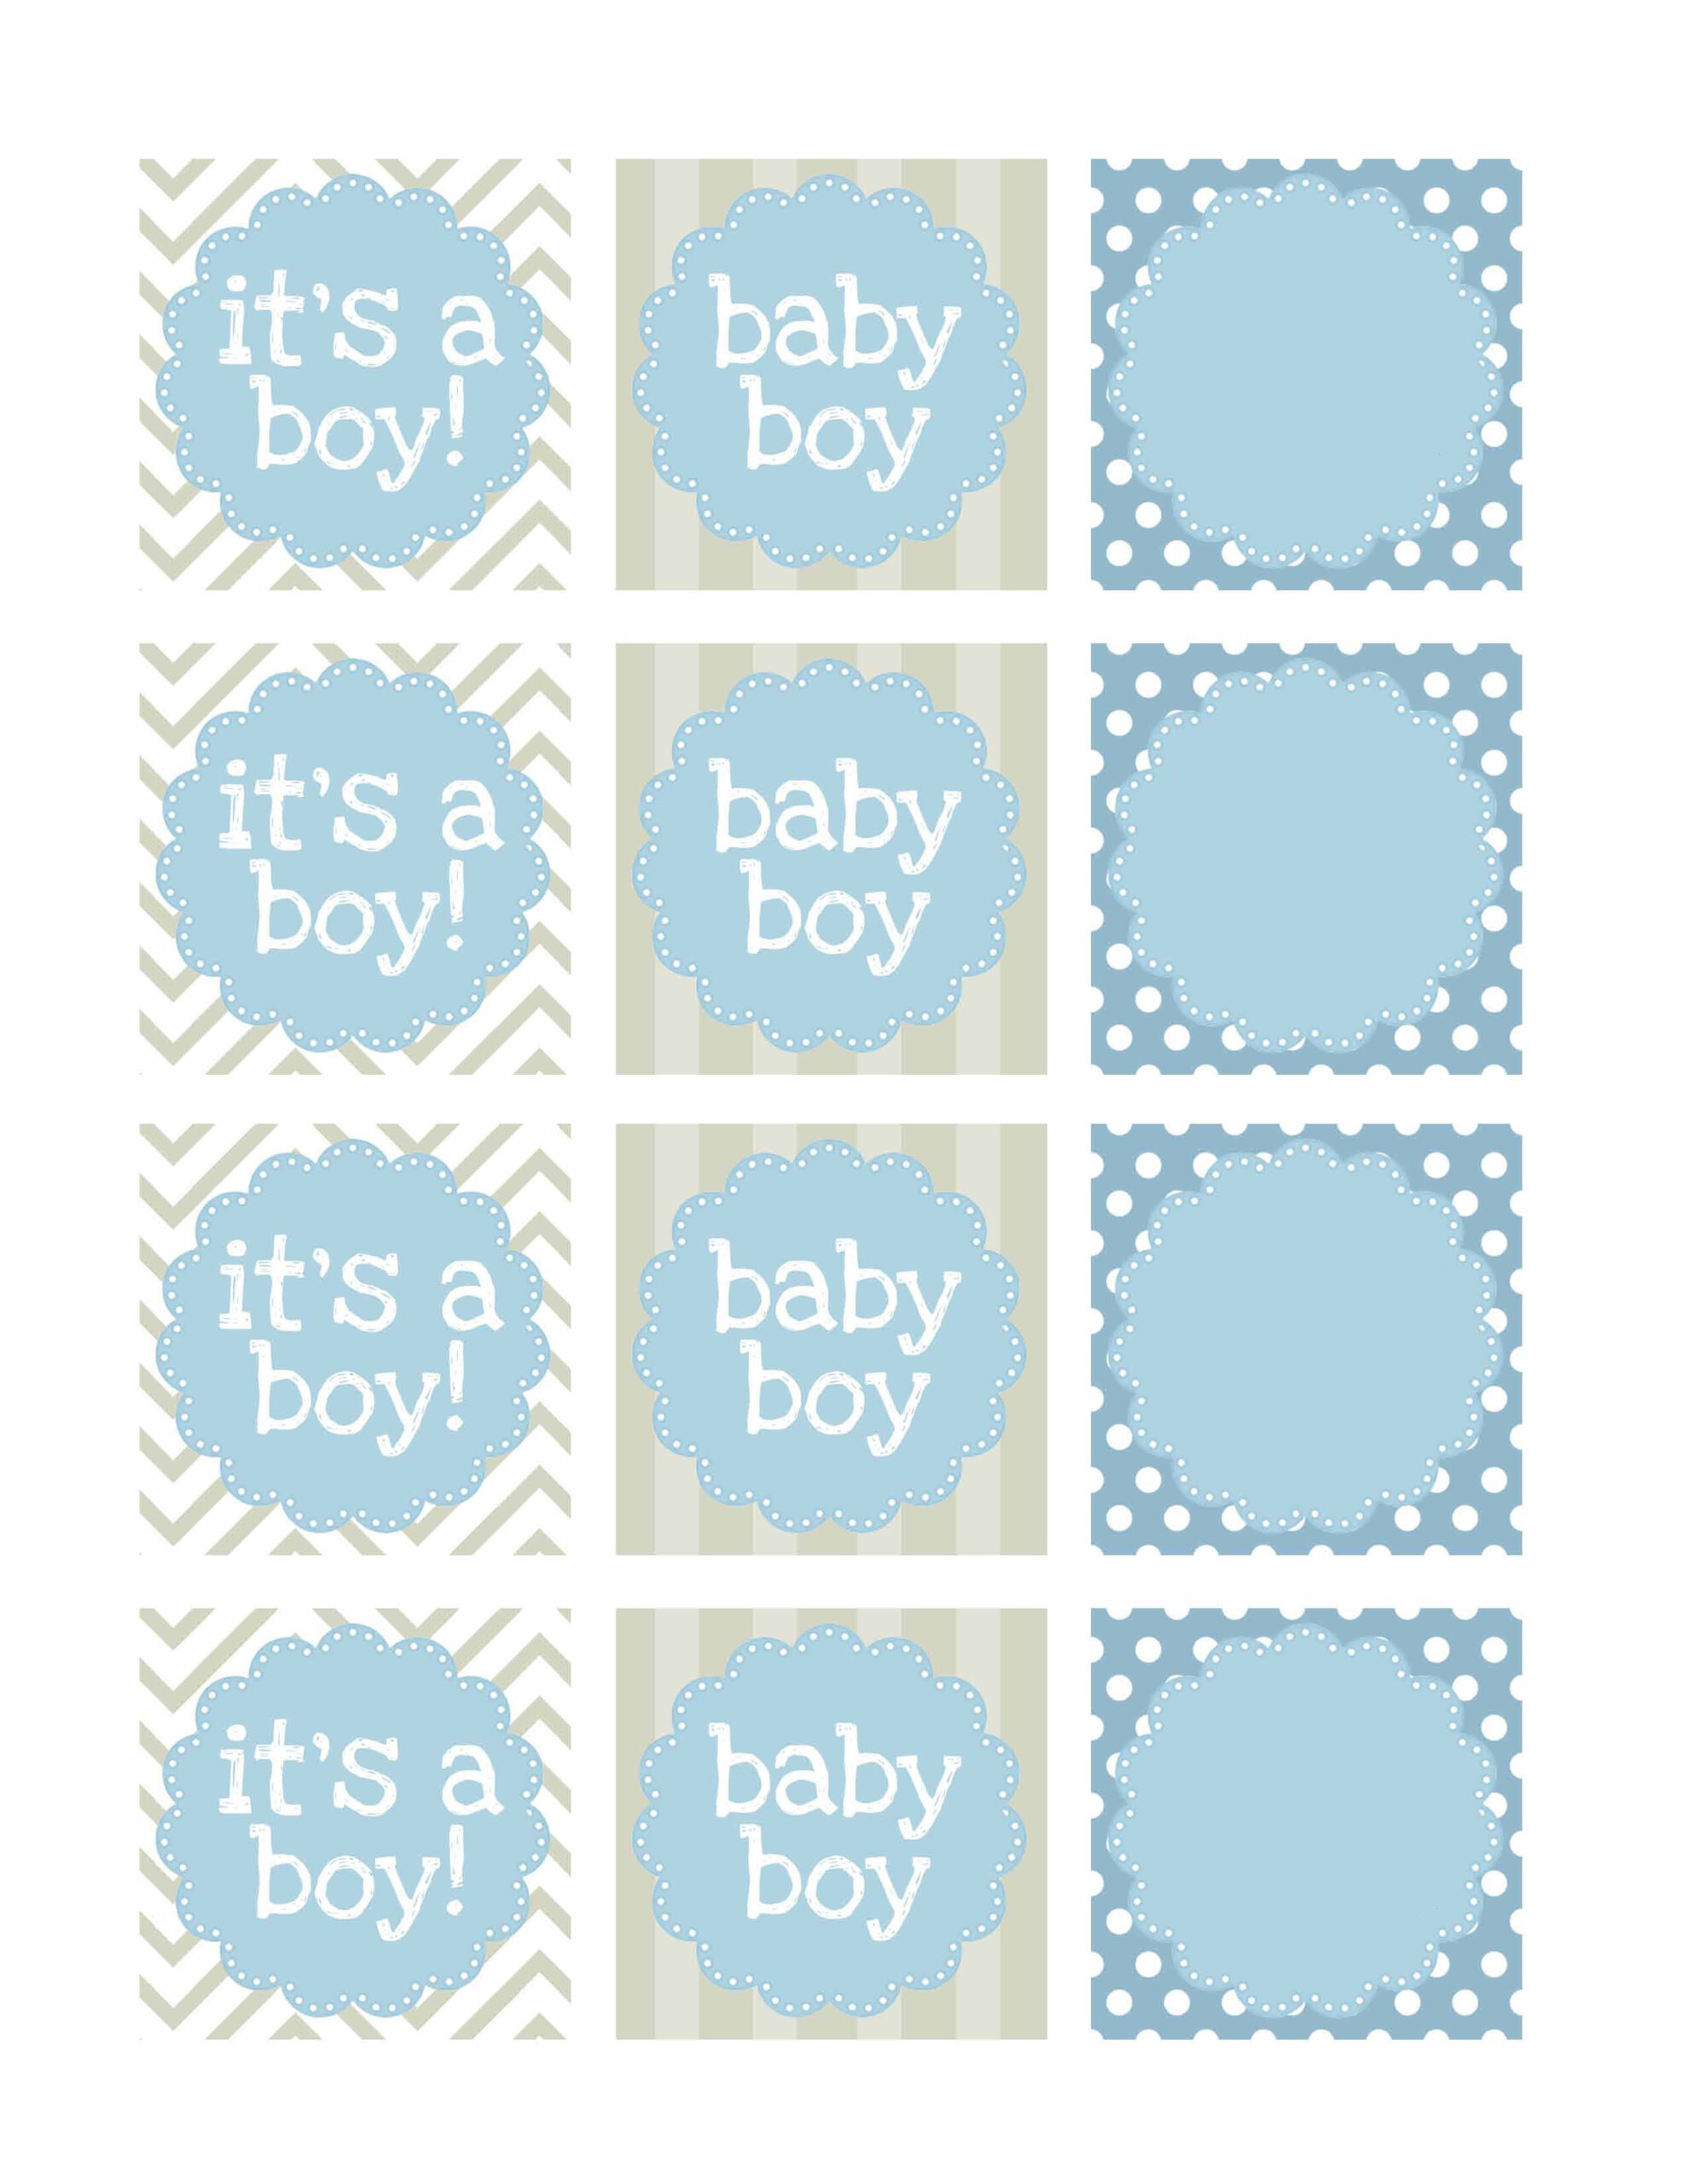 Boy Baby Shower Free Printables | Baby Shower Labels, Baby Shower within Free Printable Baby Shower Decorations For A Boy